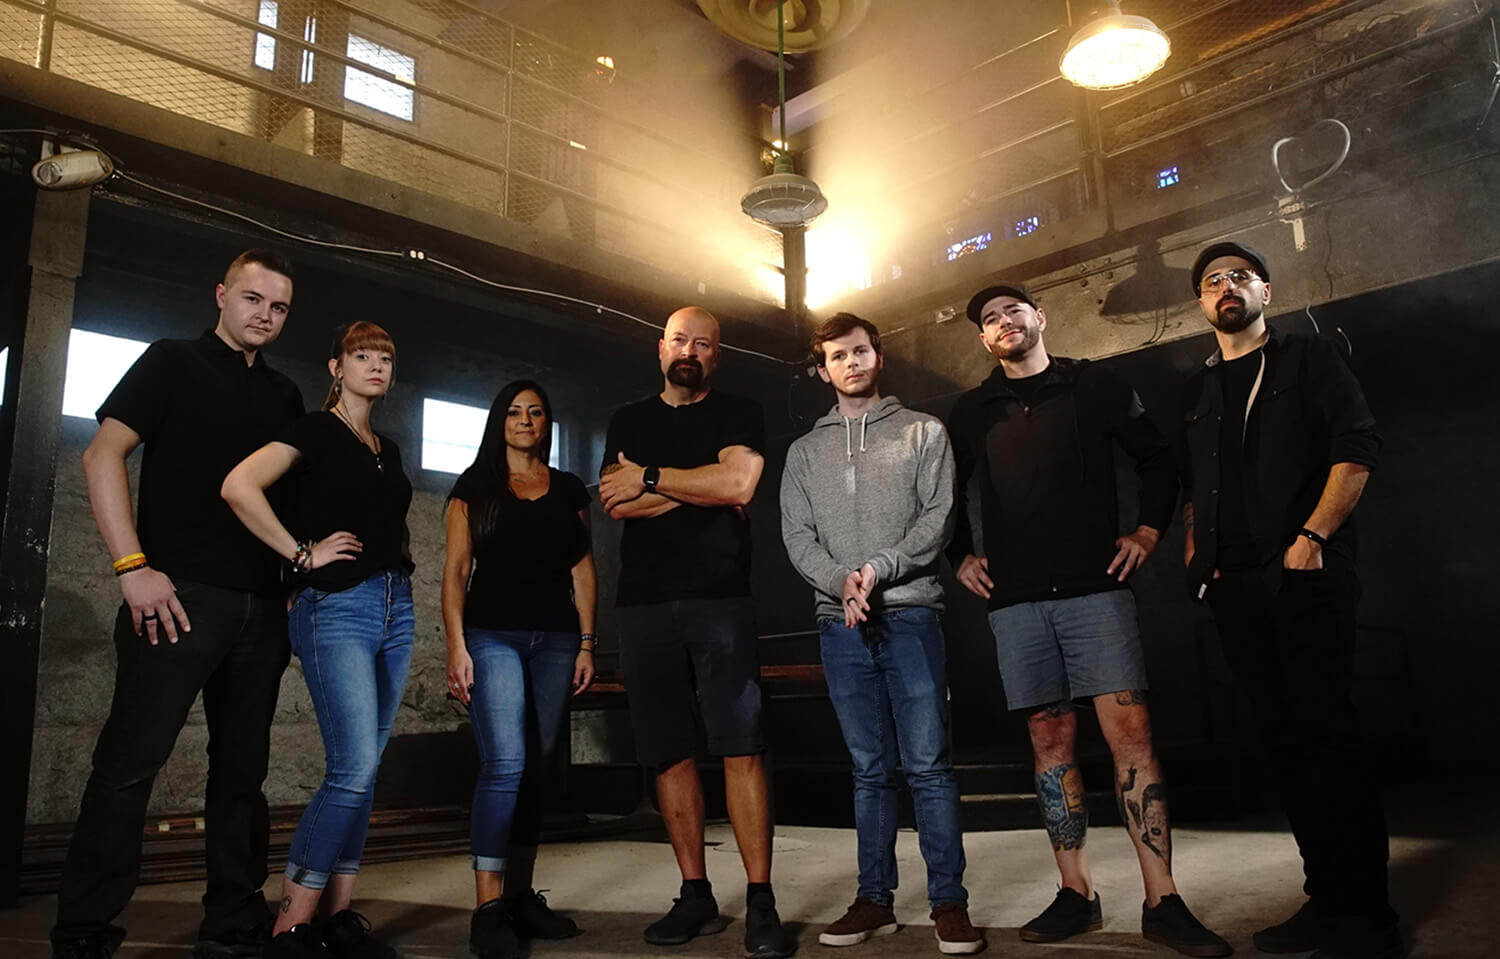 ‘Ghost Hunters’ Season 16 Episode Dates, How to Watch, and What to Expect